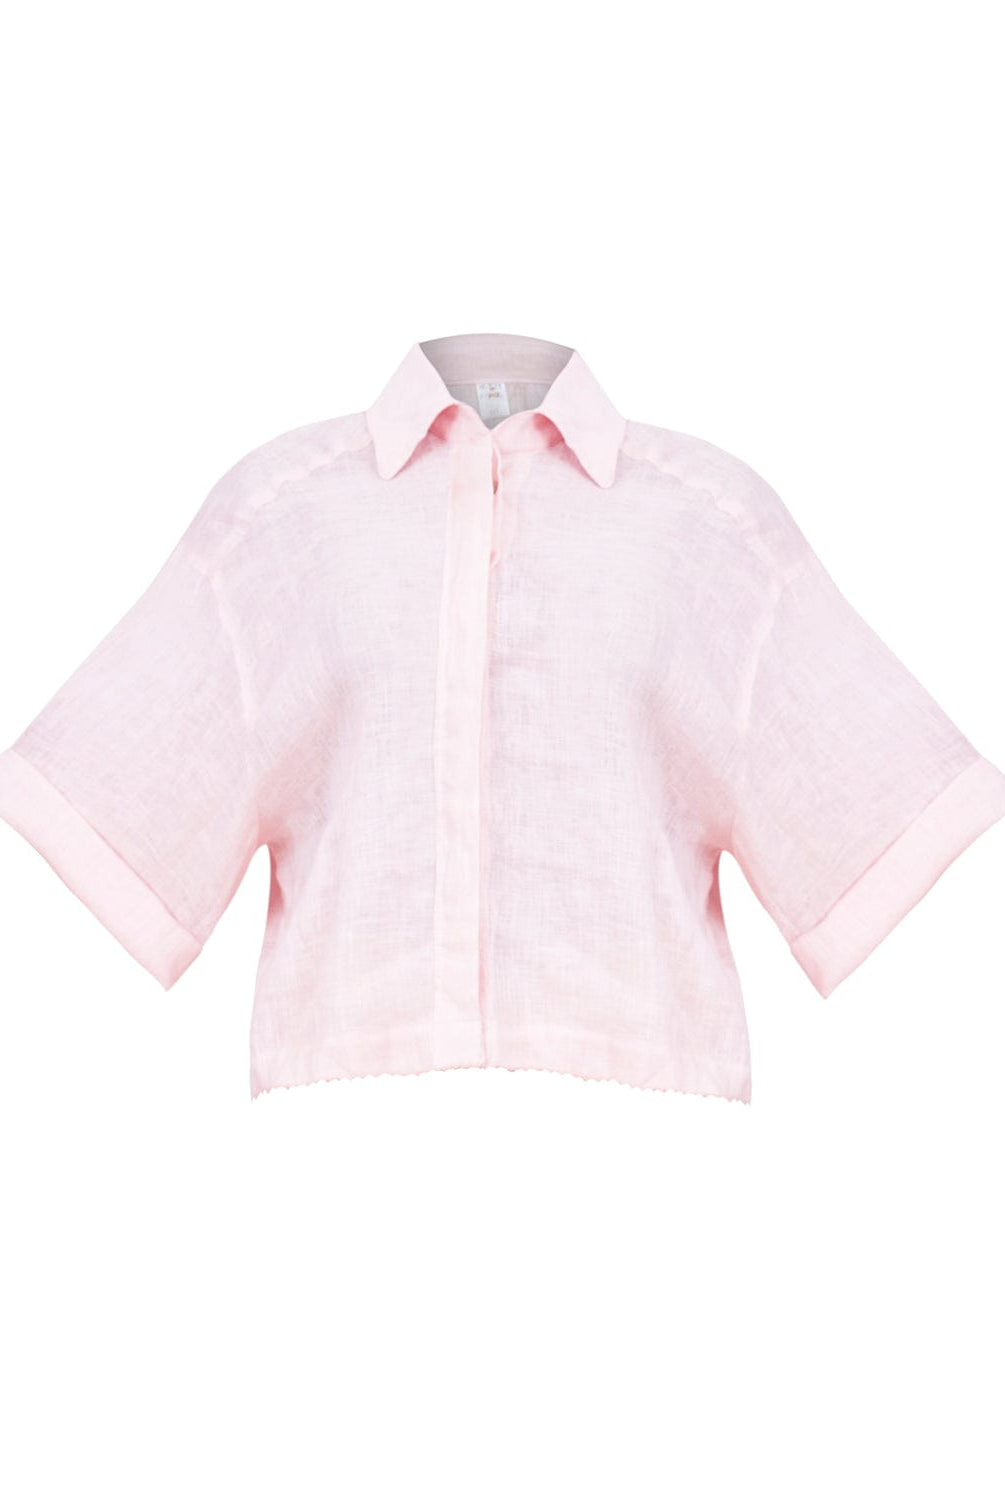 A pink linen button coverup shirt. Featured against a white wall background.